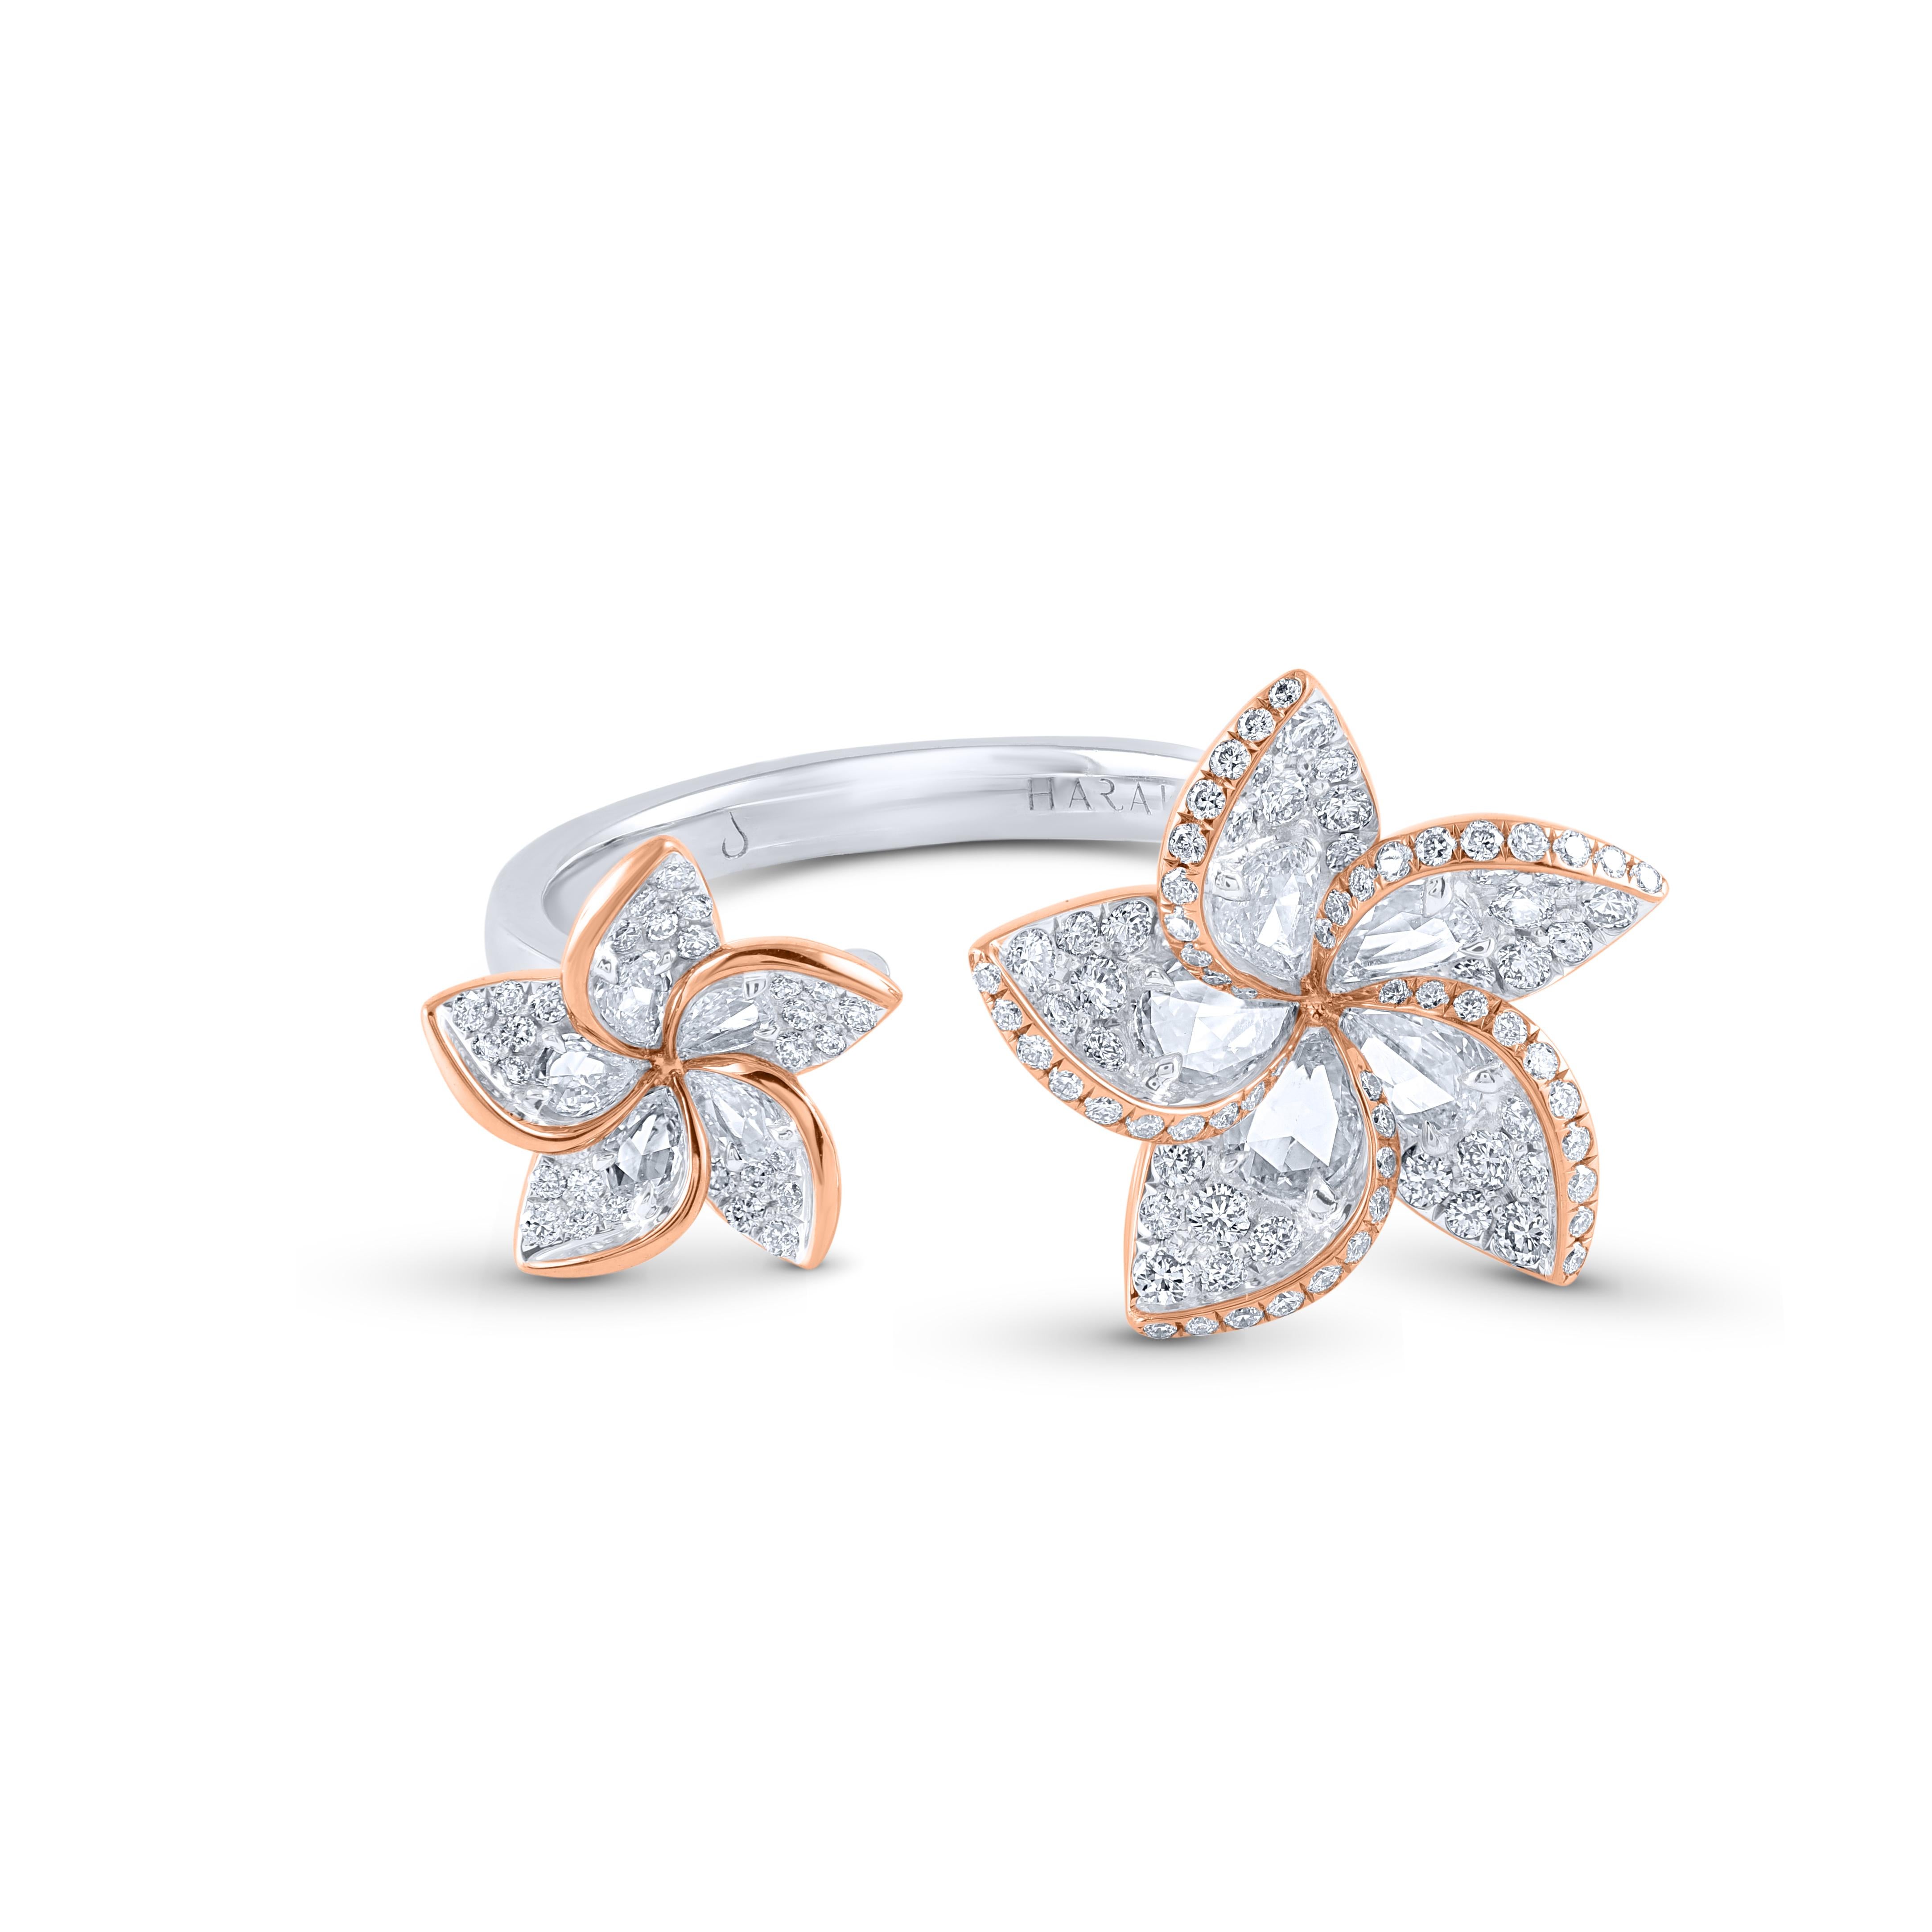 This beautiful floral ring features shimmering pear rose cut diamonds and brilliant round in pave setting resembling petals crafted in 18 karat white and rose gold. The ring is studded with a total of 115 brilliant cut and 10 rose cut pear diamonds